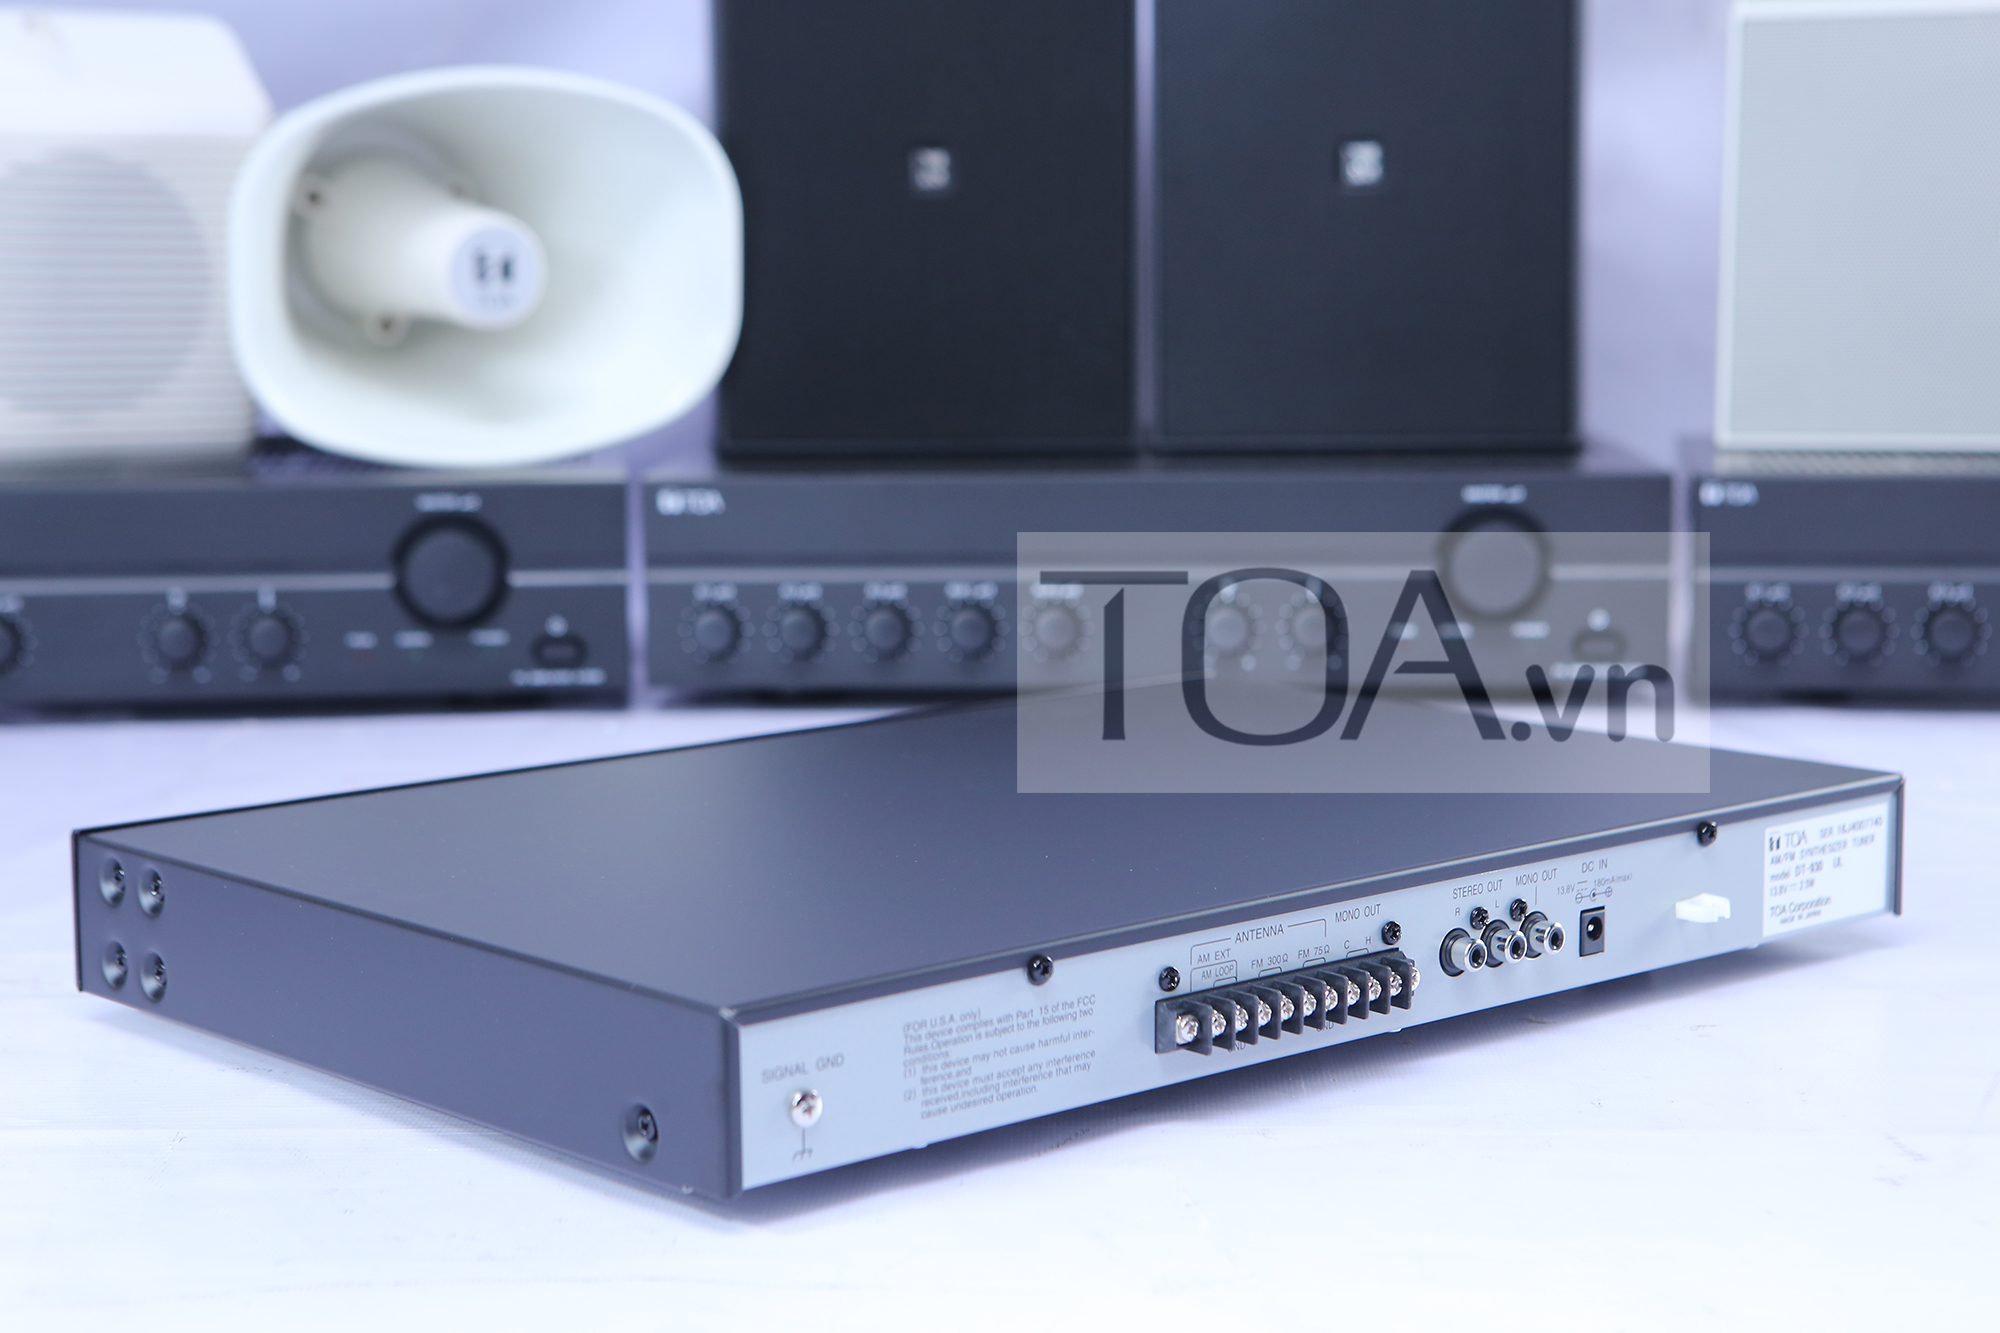 TOA DT-930 UL : AM/FM TUNER, SẢN PHẨM TOA DT-930 UL